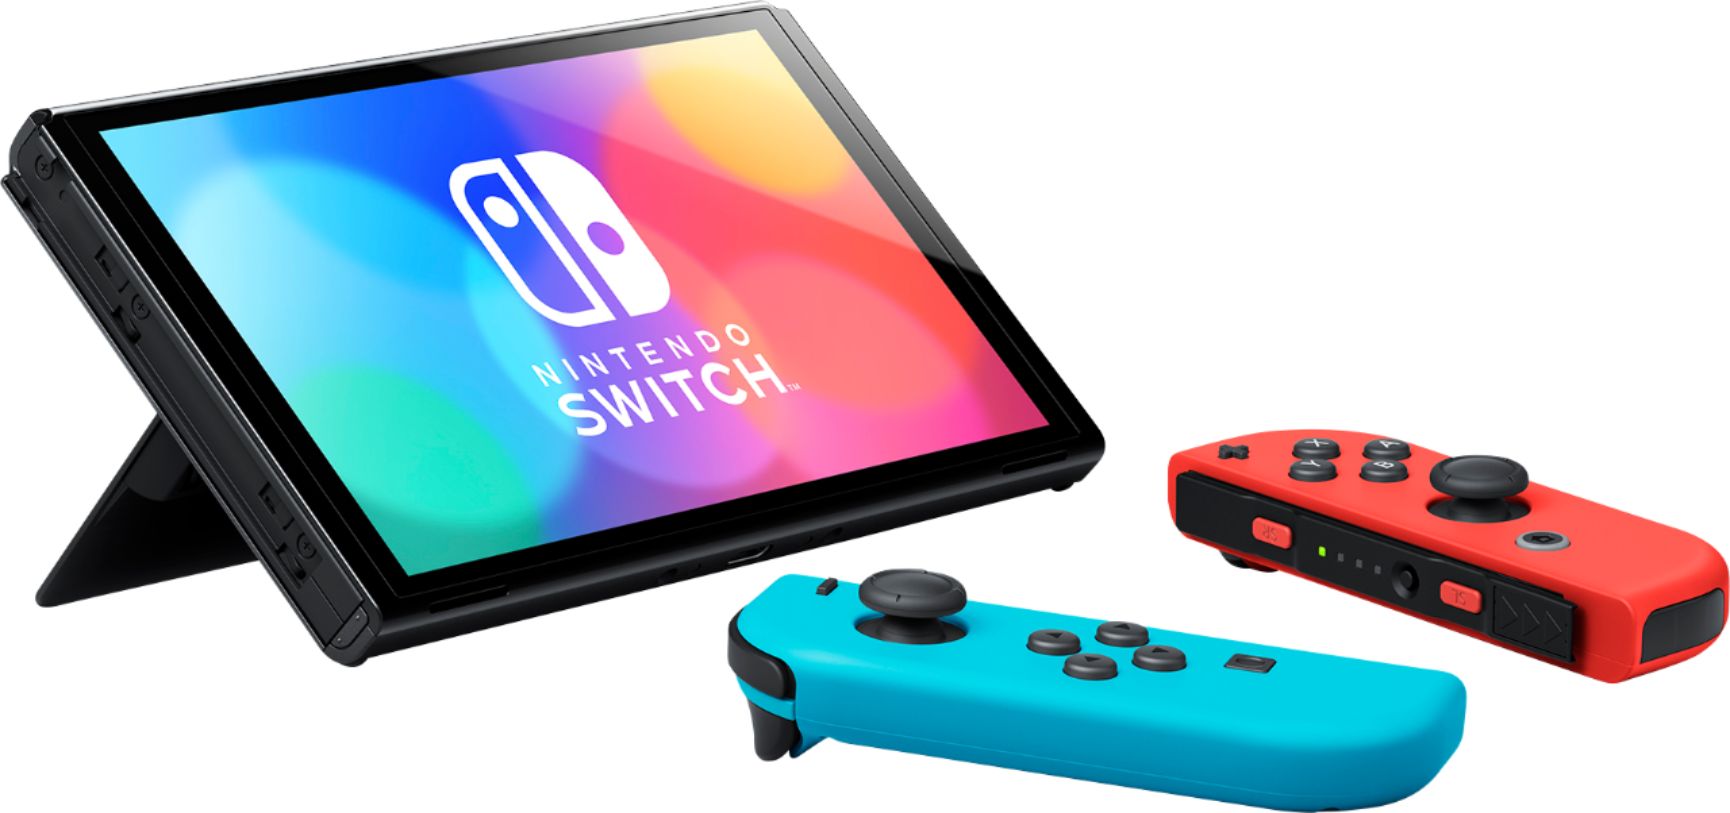 2022 New Nintendo Switch OLED Model Neon Red Blue Joy Con 64GB Console Improved HD Screen & LAN-Port Dock with Triangle Strategy -  Mytrix Wireless Switch Pro Controller and Accessories